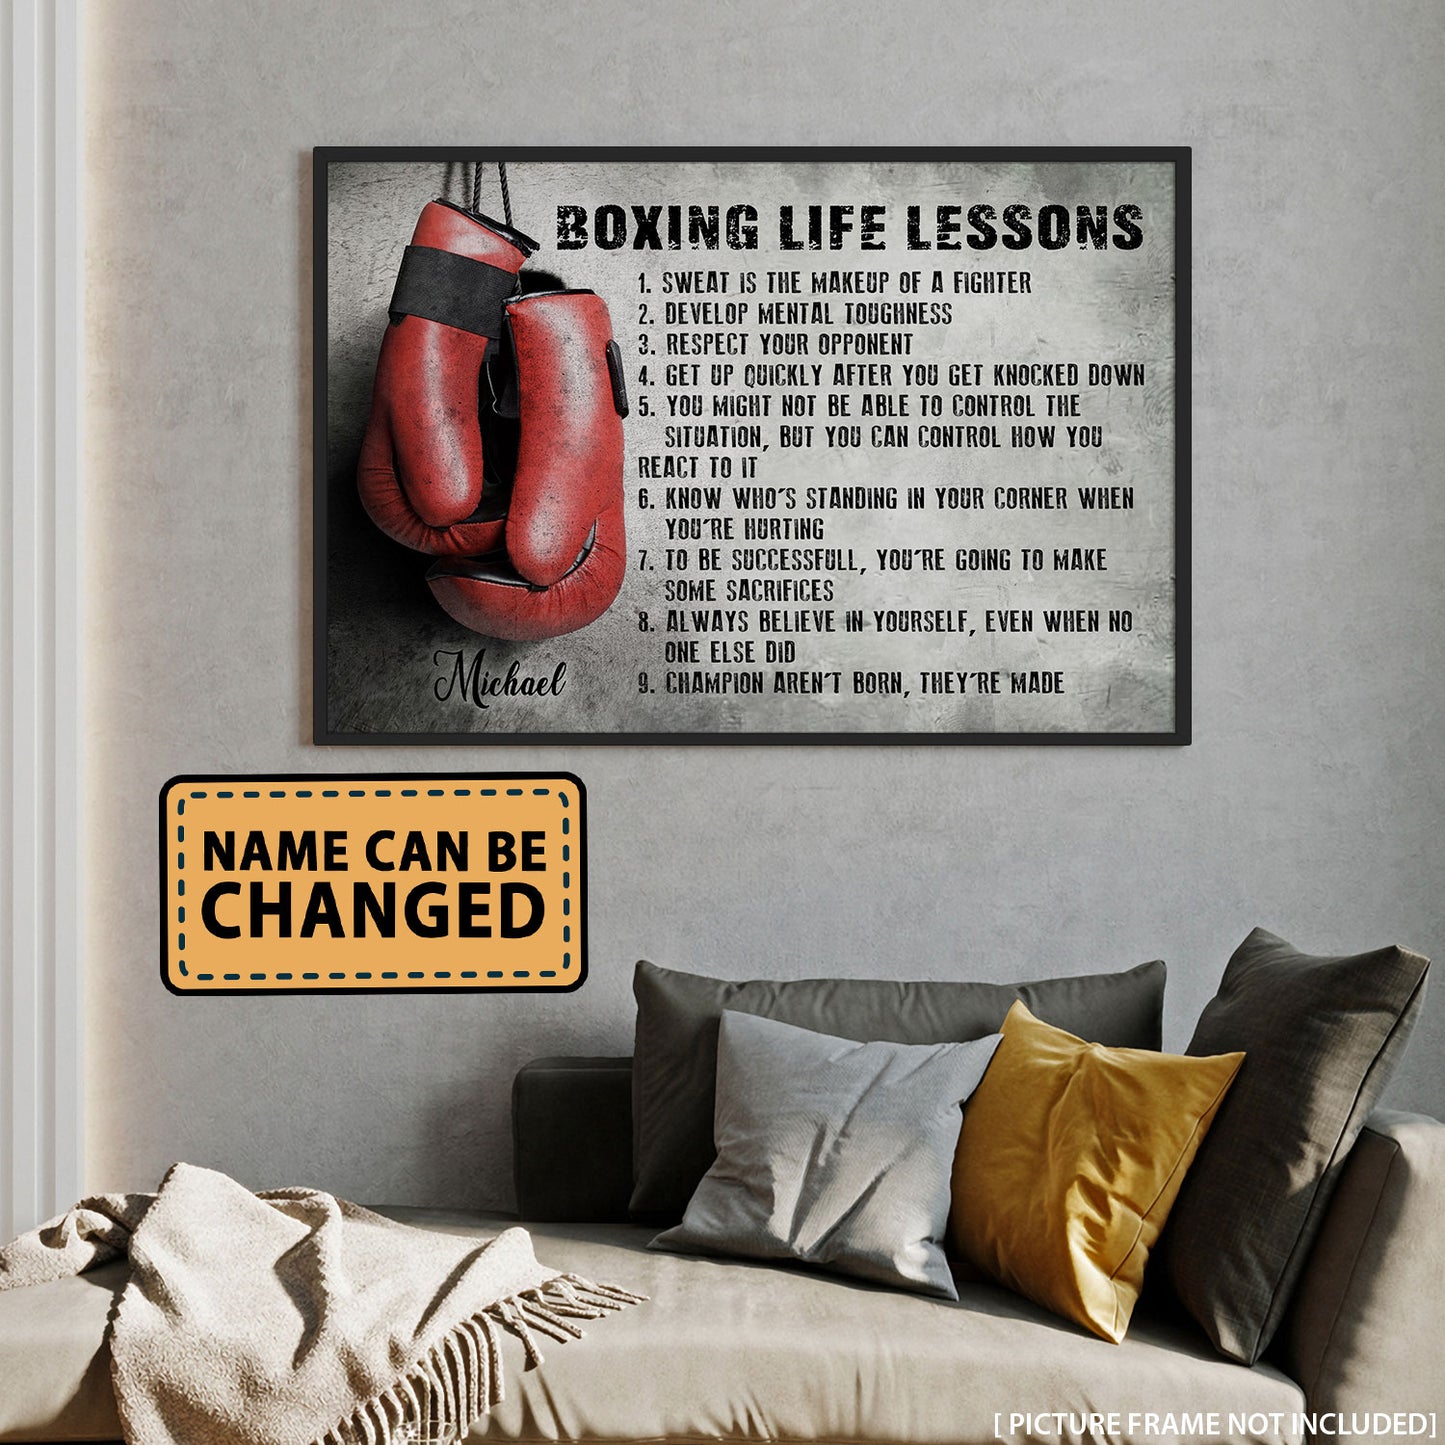 Boxing Life Lessons Personalized Poster